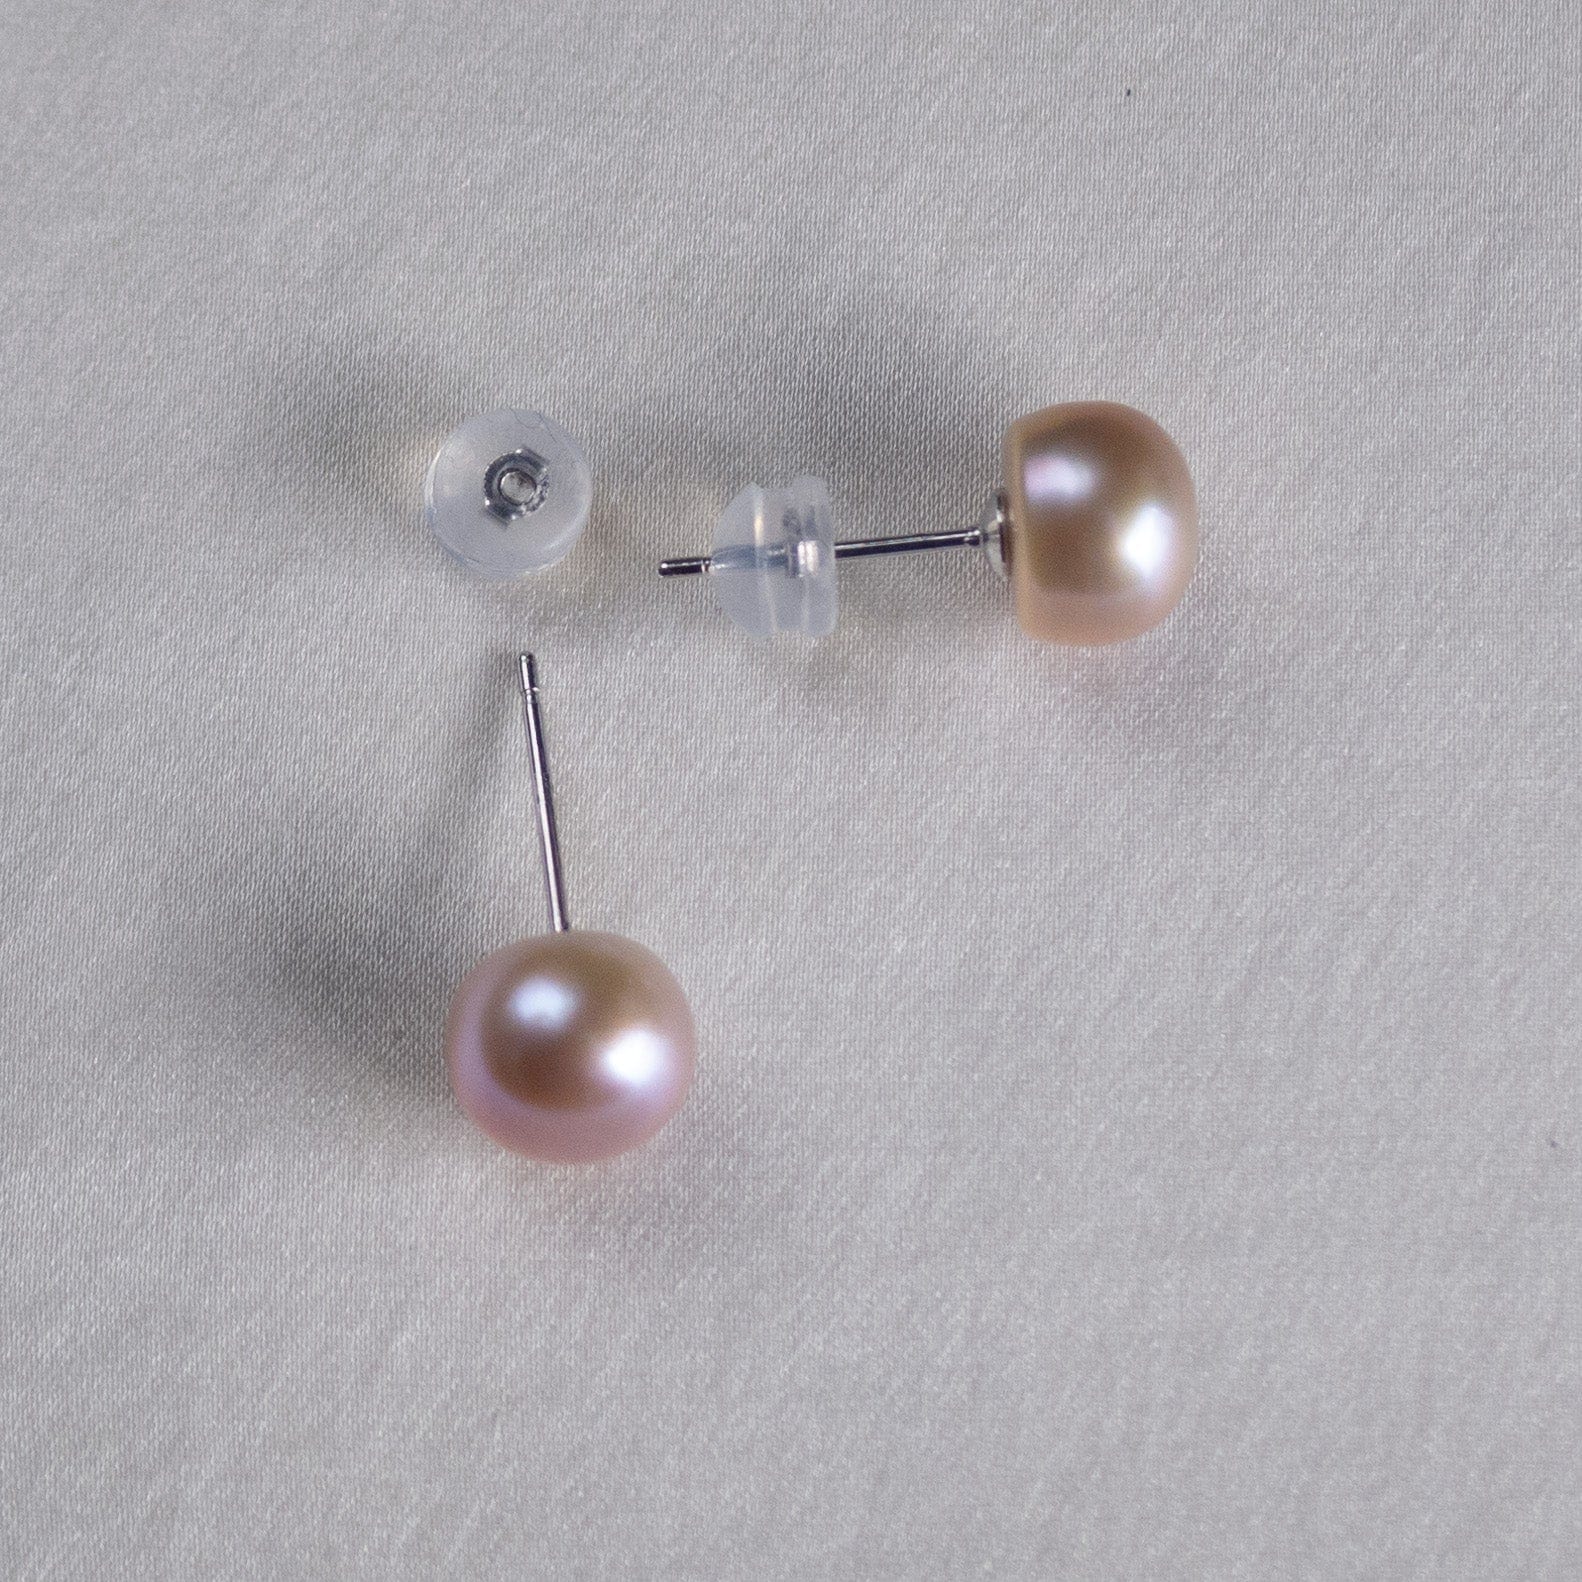 Arbor Trading Post Earrings Handcrafted 8mm Freshwater Baroque Pearl Stud Earrings - 925 Sterling Silver, Light Pink or Light Purple